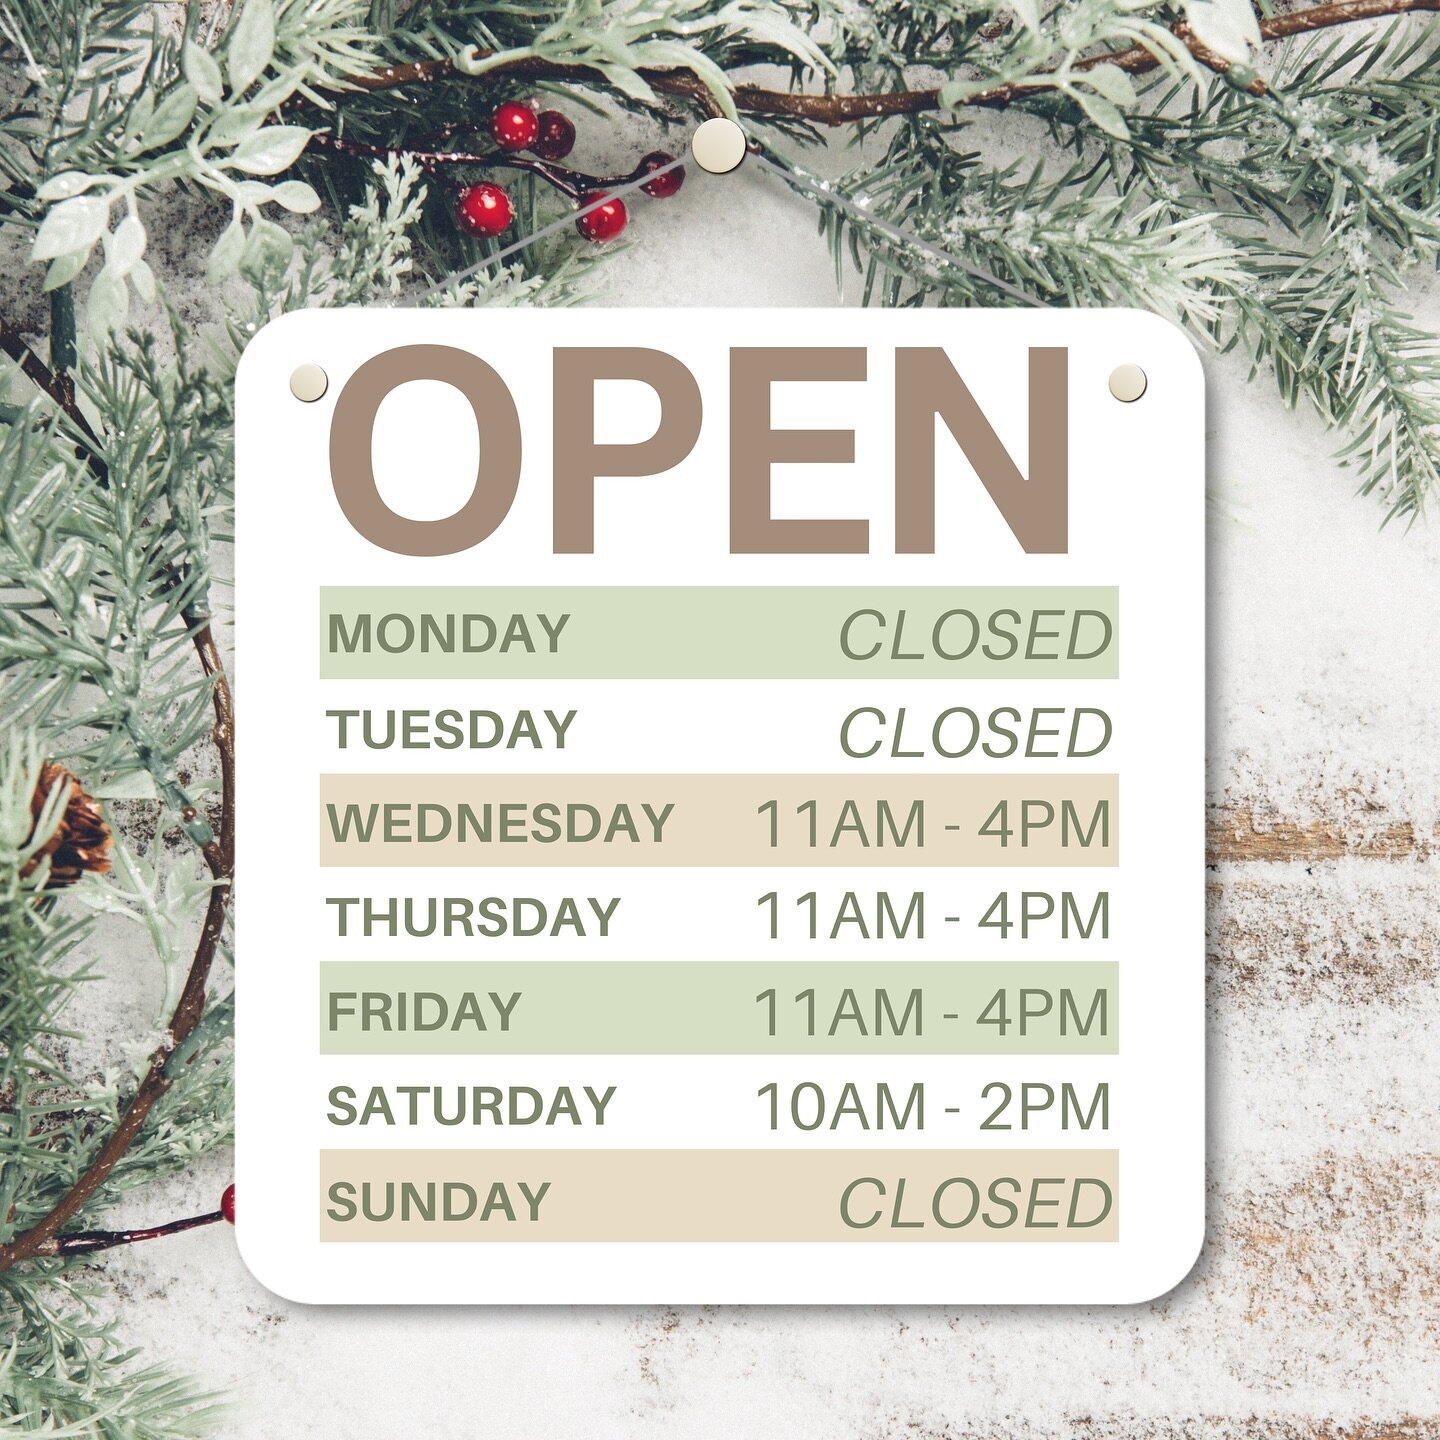 New Winter Hours ❄️🌲
-
If you need to speak with one of us while we&rsquo;re closed, you can still reach out at 814-594-7625 &amp; we&rsquo;ll do our best to help you out! 🙌🏼